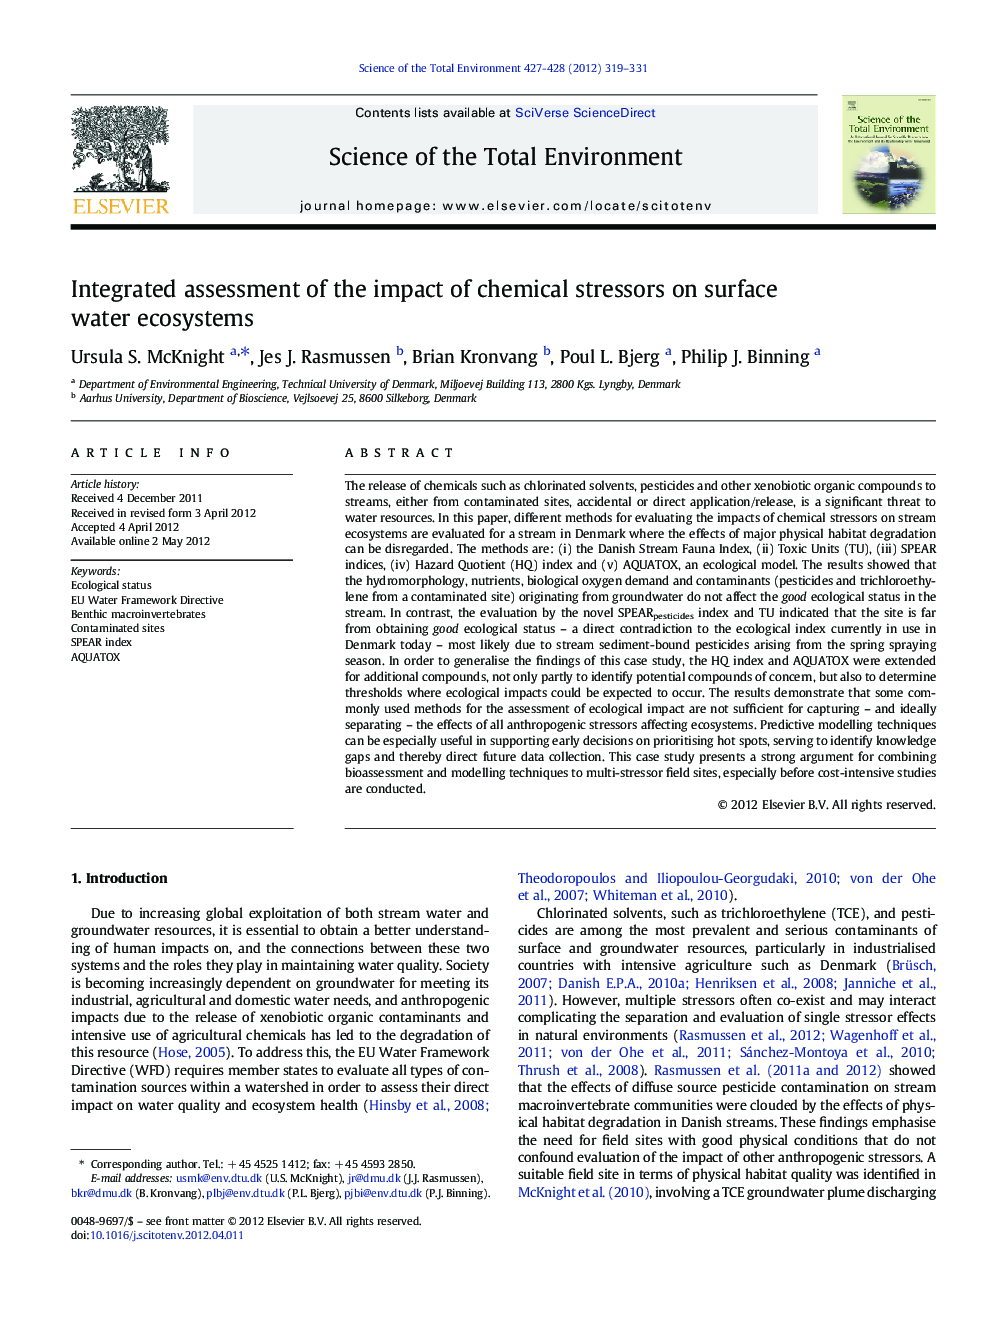 Integrated assessment of the impact of chemical stressors on surface water ecosystems